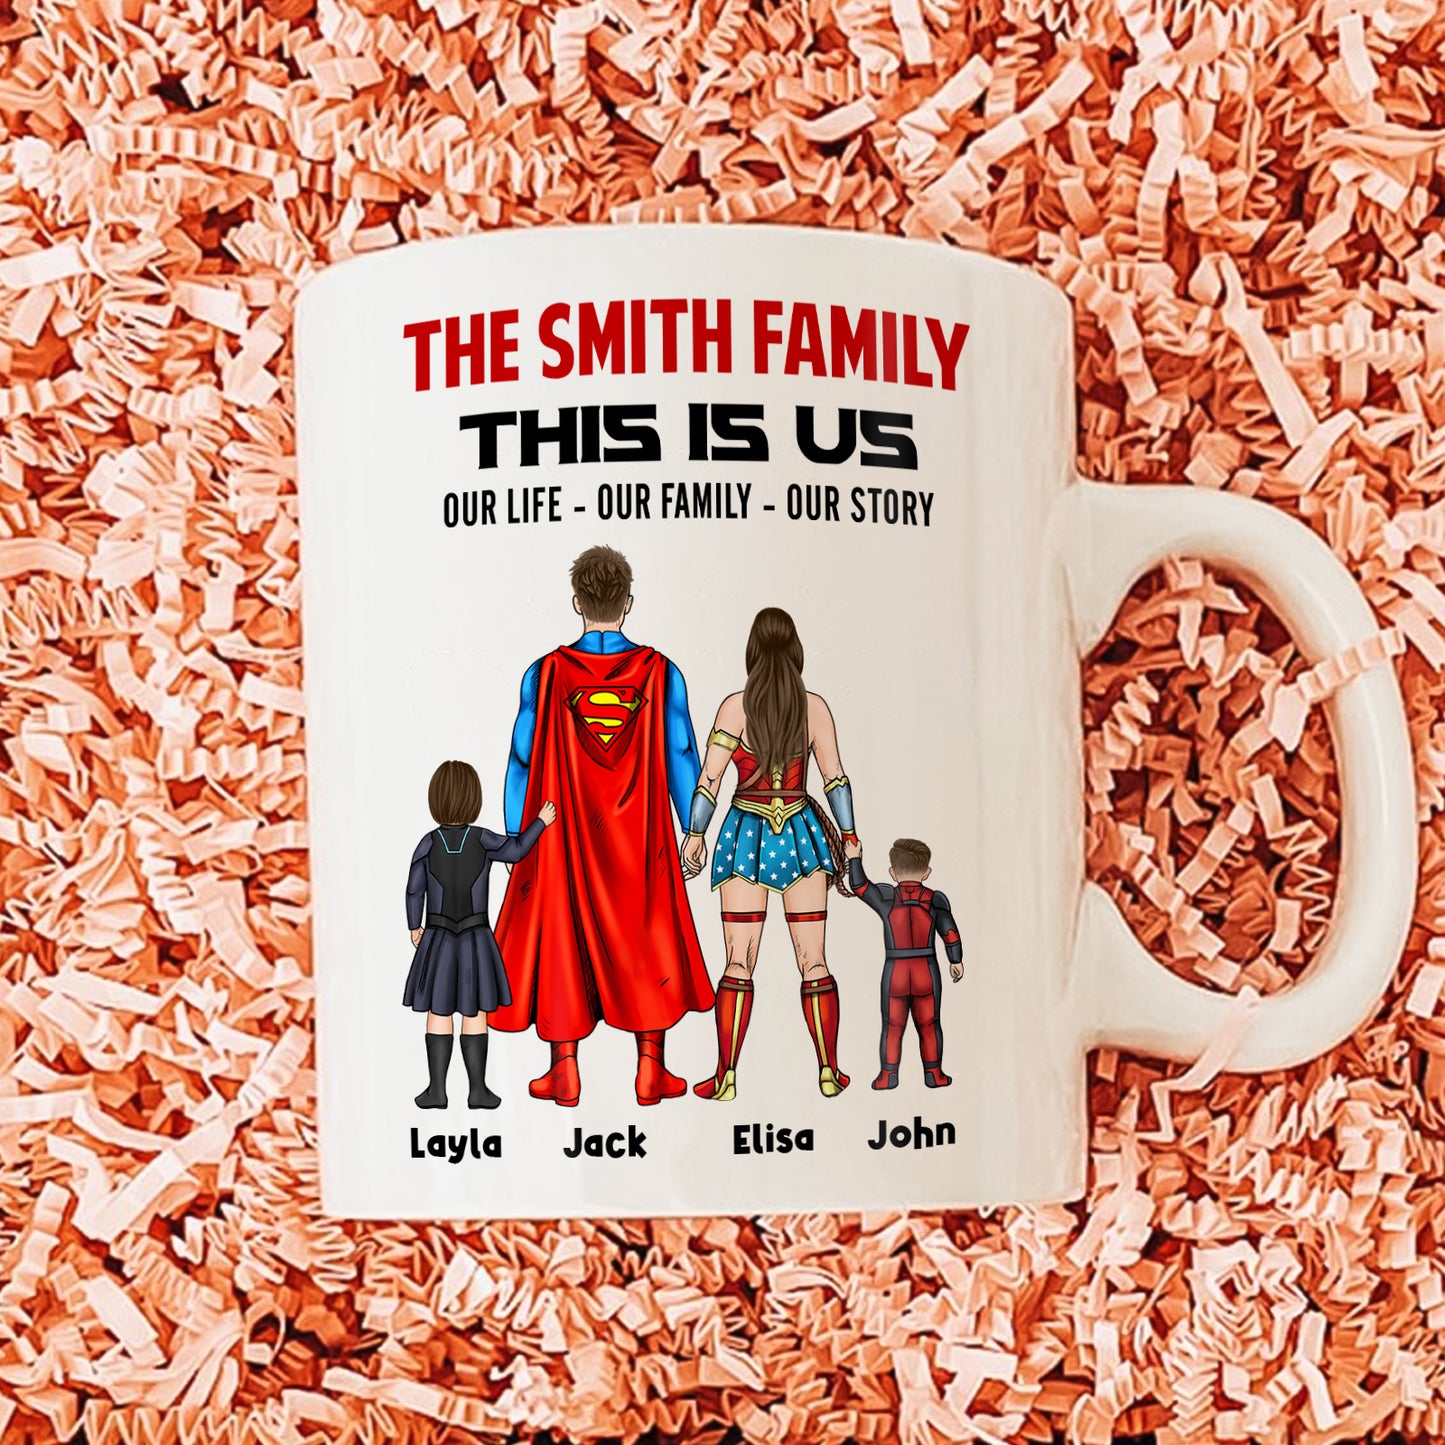 Family - The Smith Family This Is Us Our Life Our Family Our Story -  Personalized Mug Ceramic